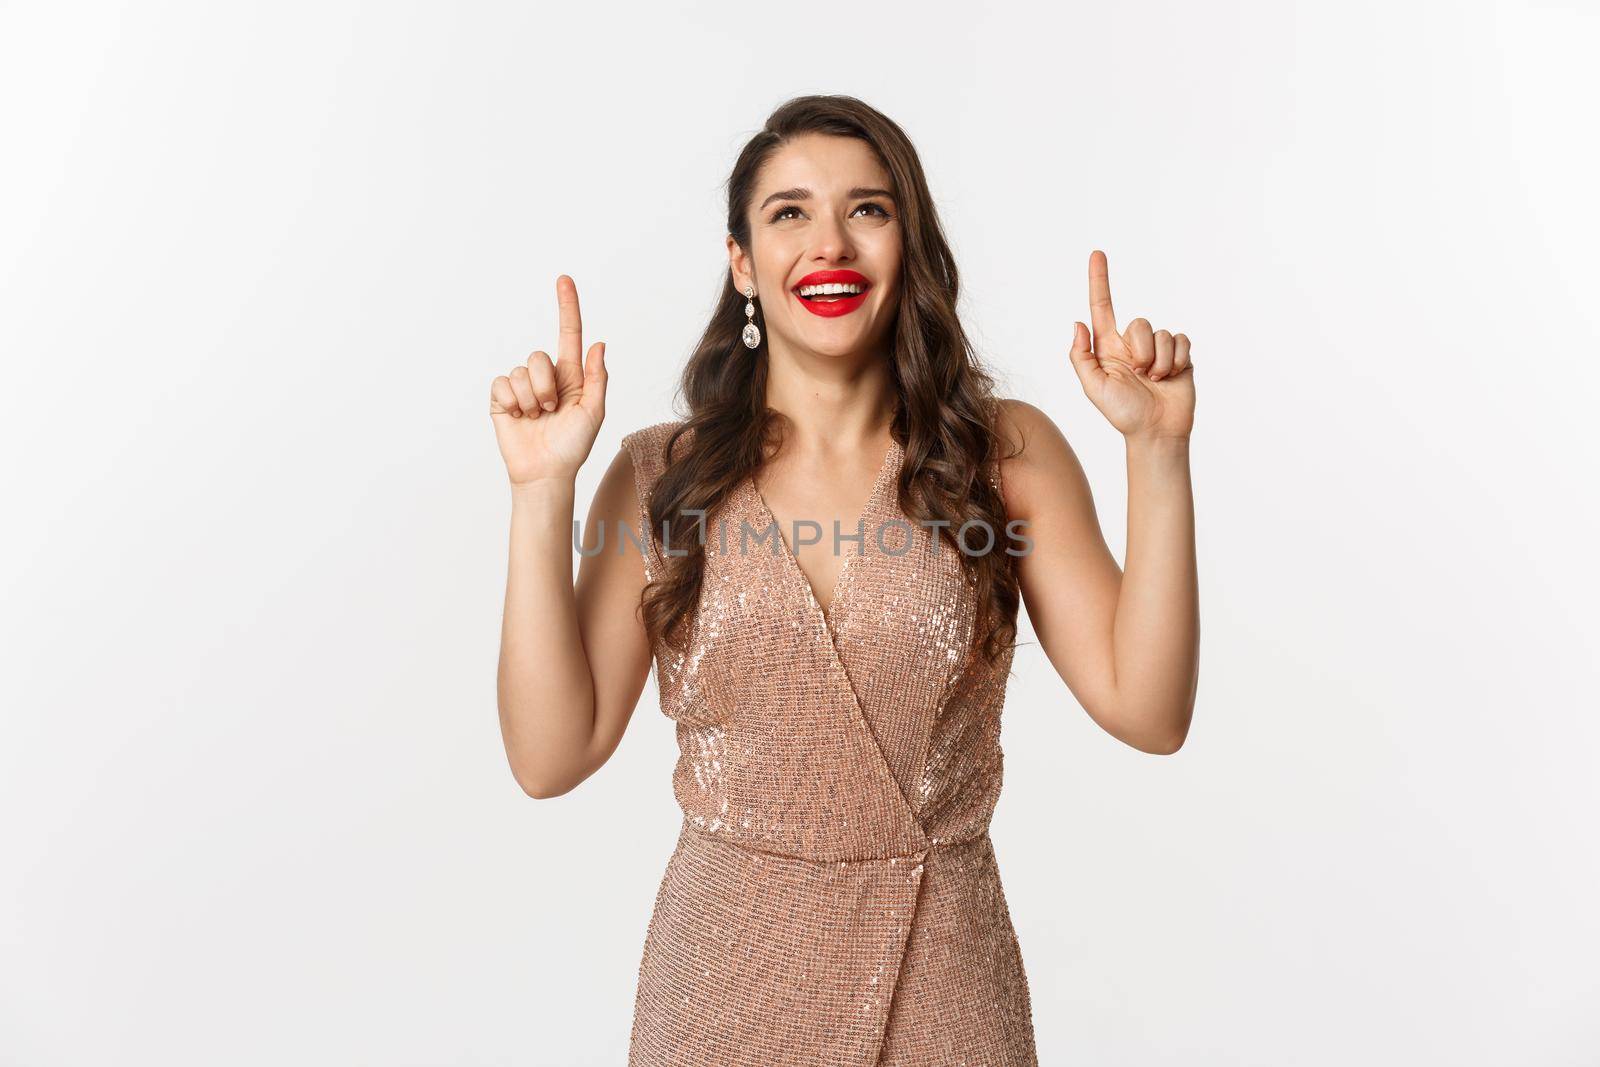 New Year, christmas and celebration concept. Happy elegant woman in party dress, laughing and looking up, pointing at top promo offer, white background.